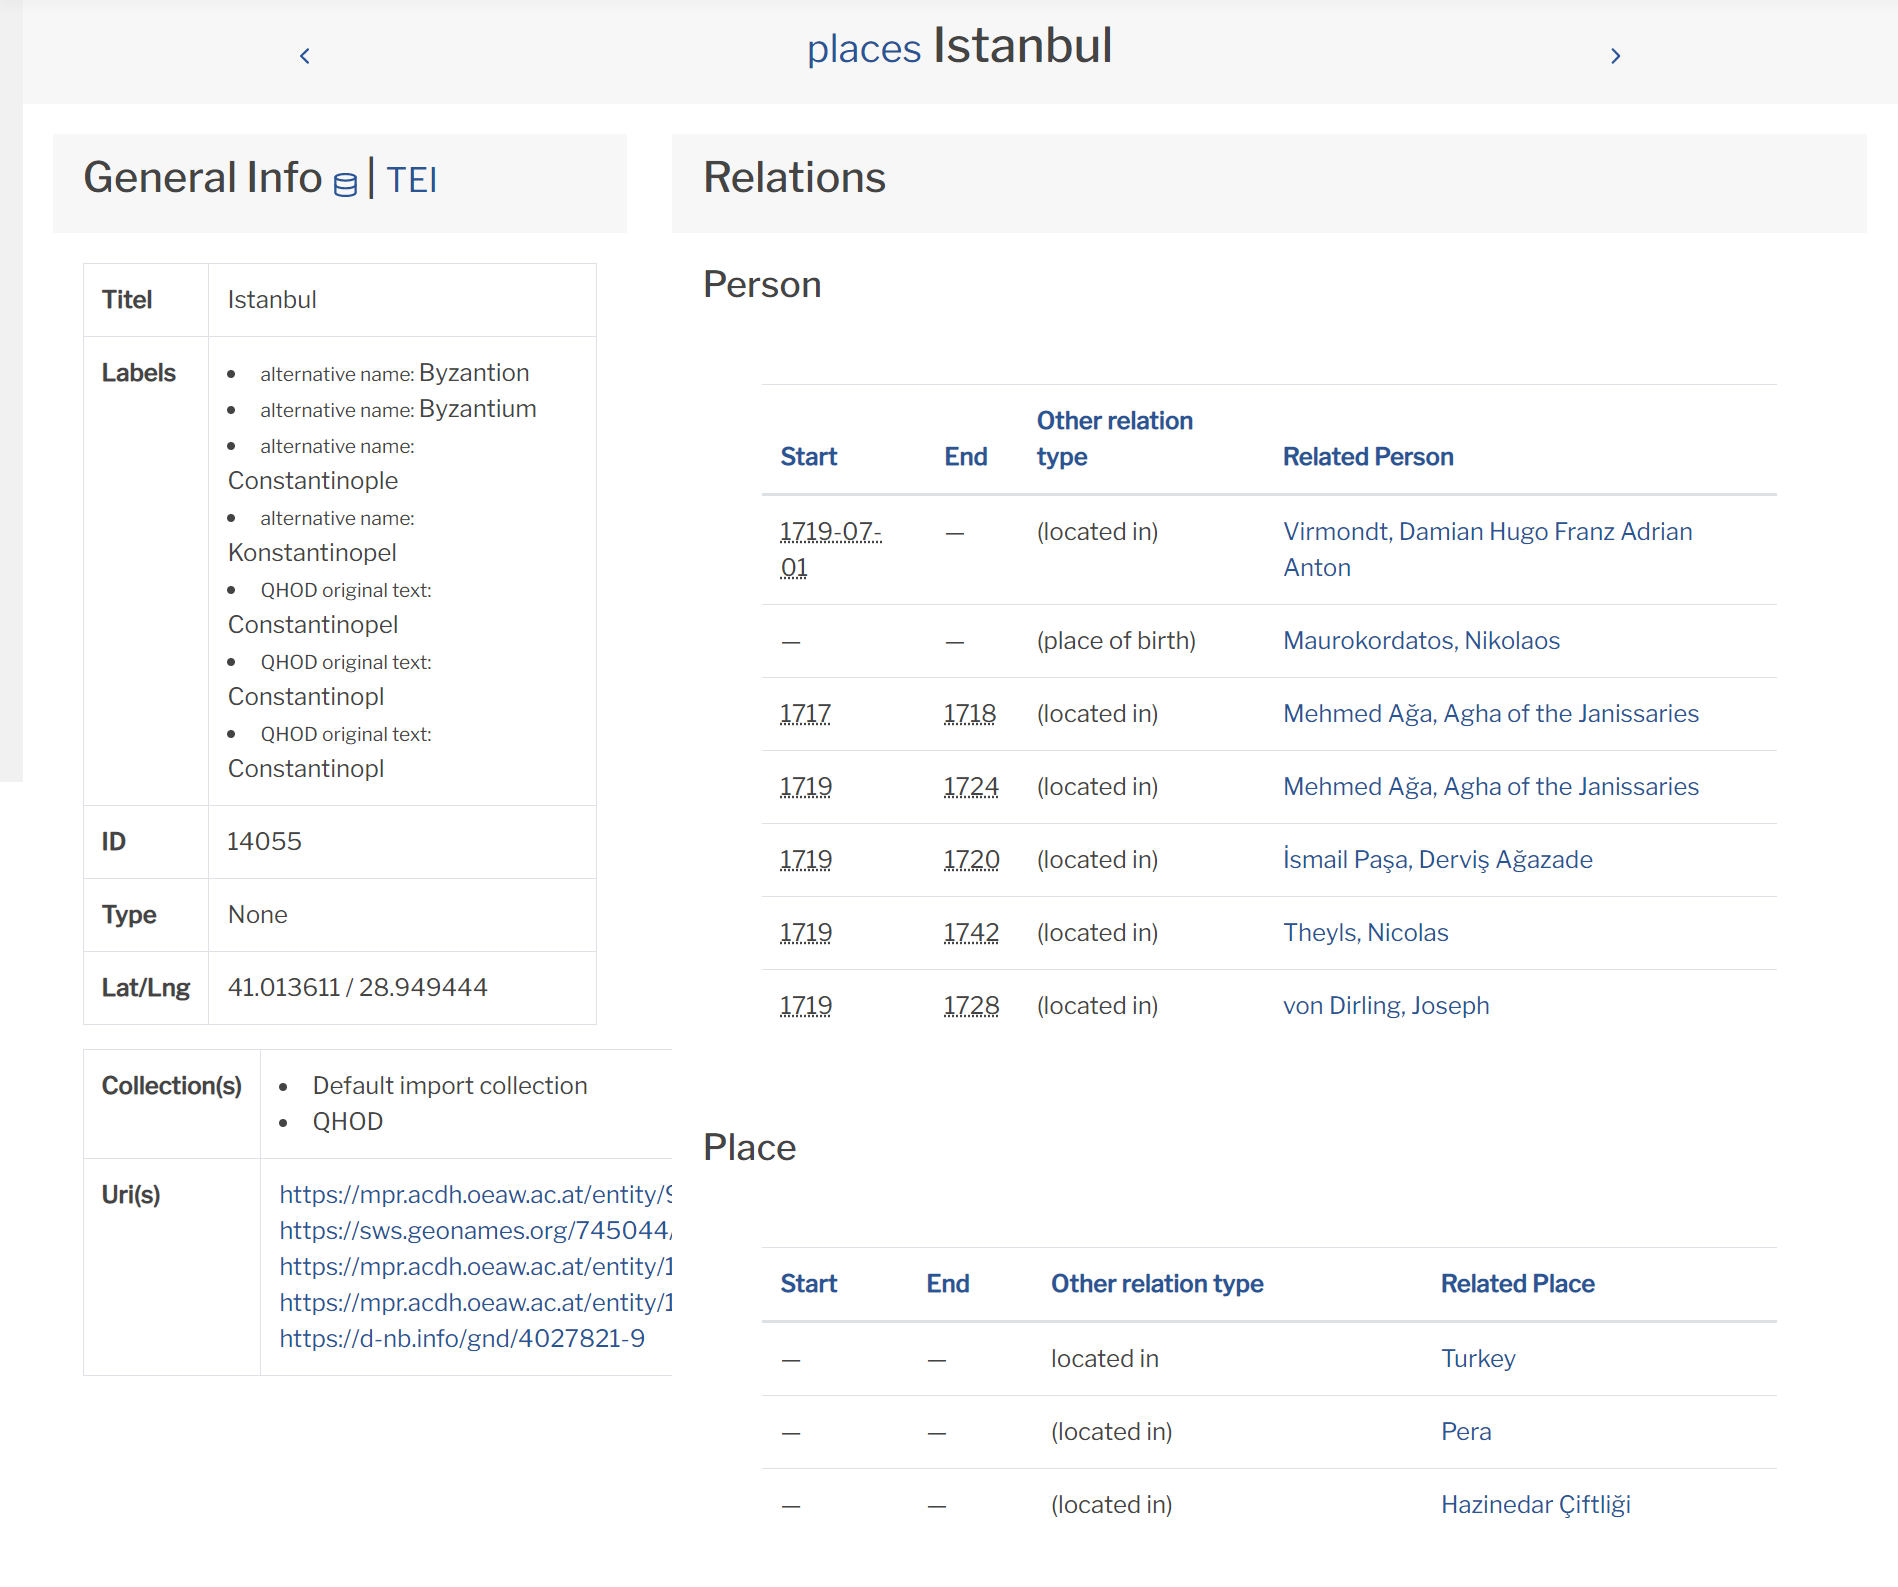 screencapture-mpr-acdh-oeaw-ac-at-apis-entities-entity-place-14055-detail-2023-04-26-20_57_36.png (258 KB)